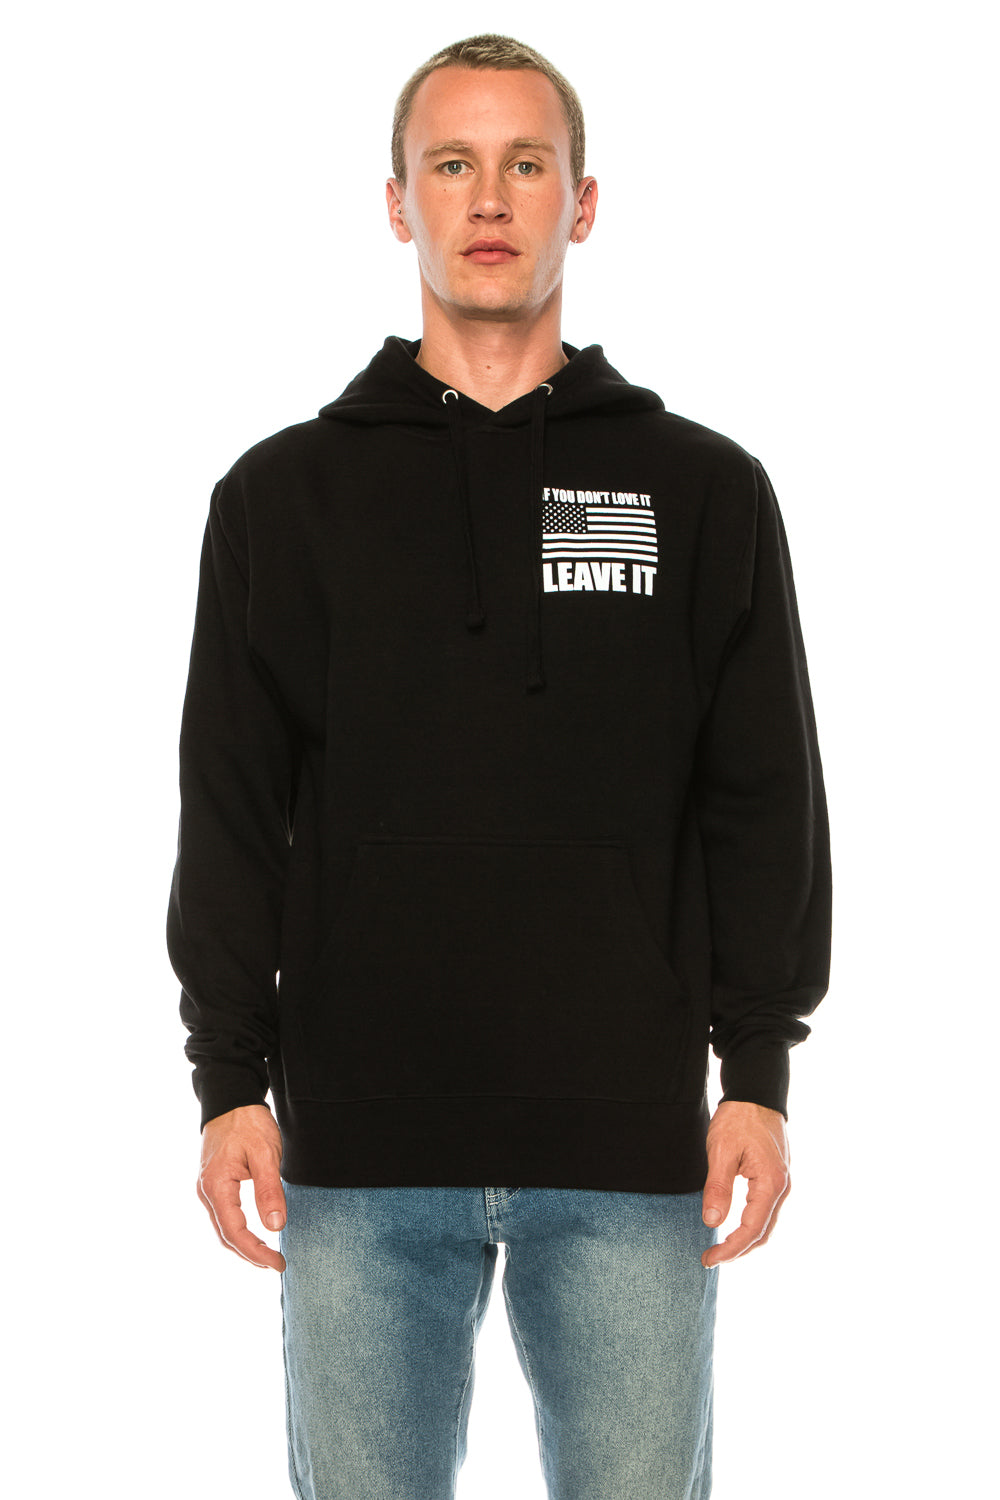 IF YOU DON'T LOVE IT LEAVE IT PULLOVER HOODIE - Trailsclothing.com